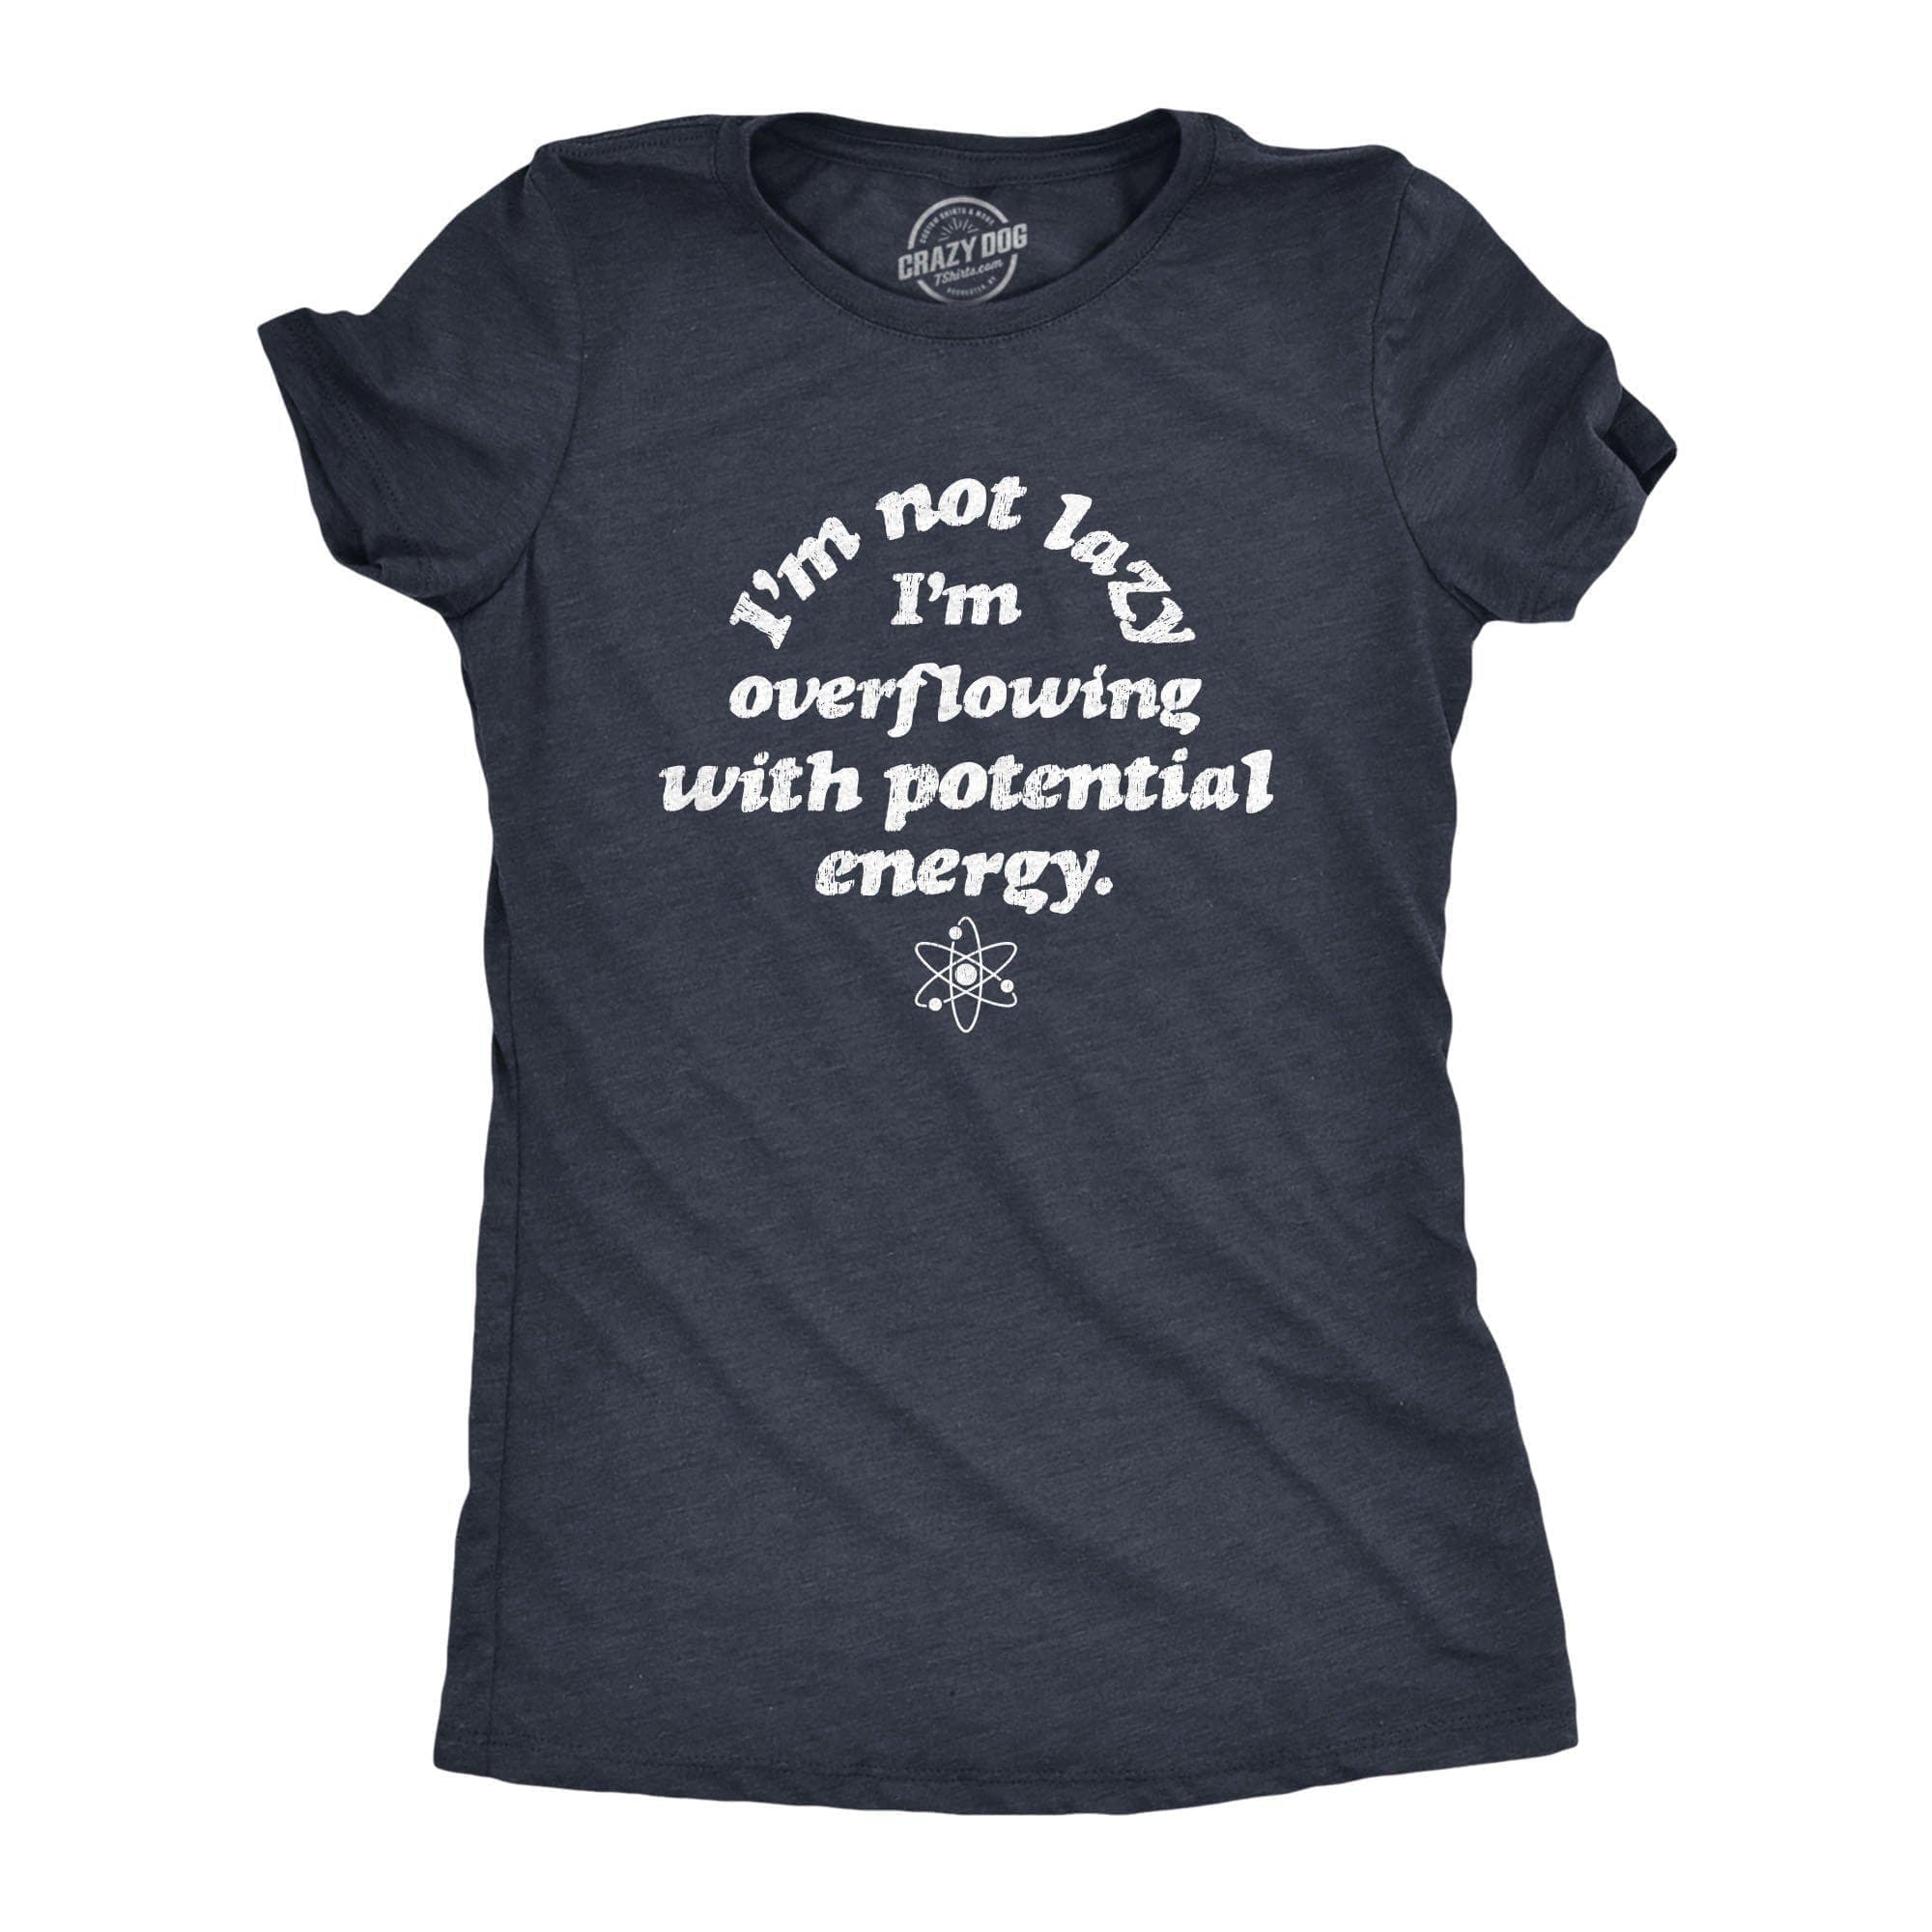 I'm Not Lazy I'm Overflowing With Potential Energy Women's Tshirt - Crazy Dog T-Shirts